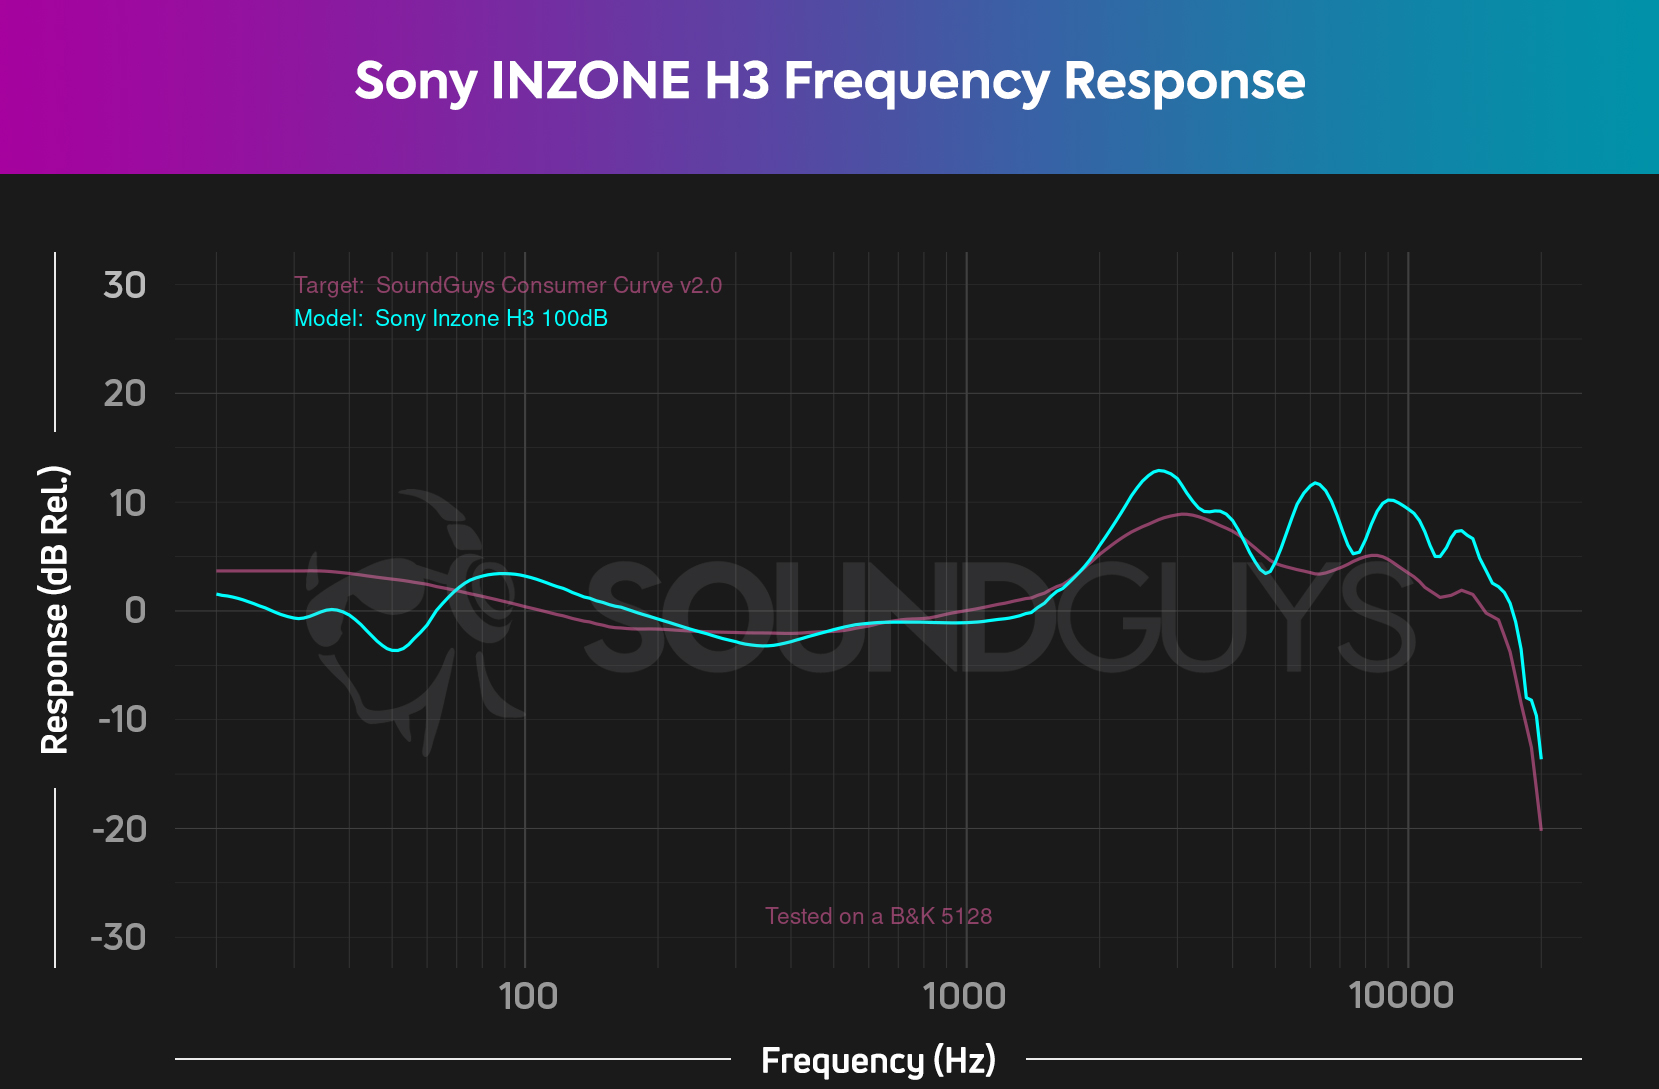 The Sony INZONE H3 frequency response chart showing a lack of sub bass and a significant amount of deviation from the ideal curve in the high end.